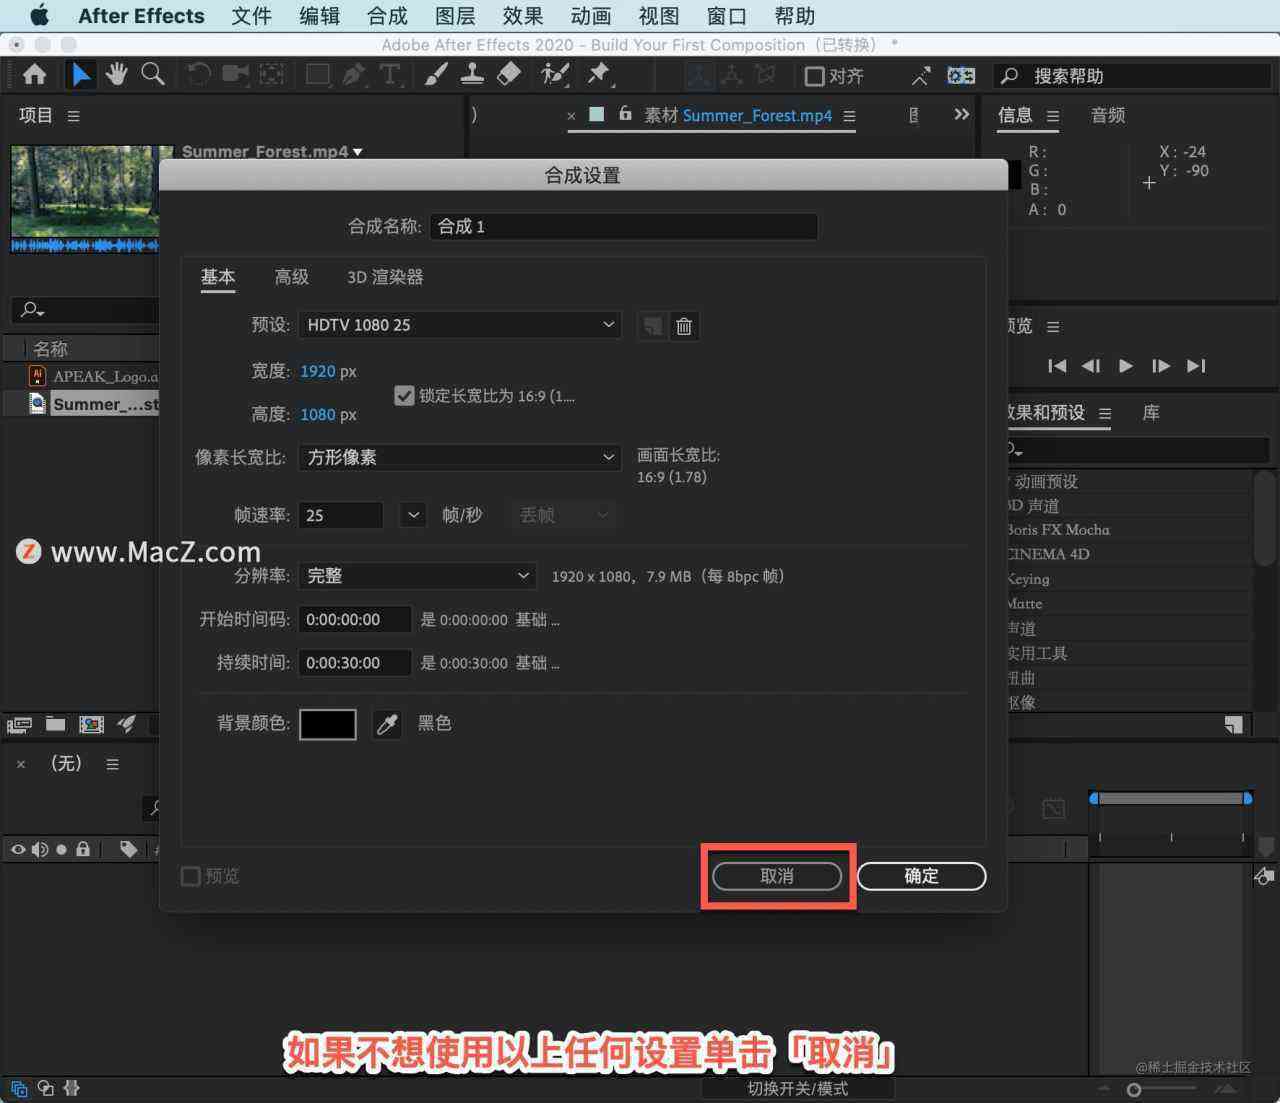 After Effects 教程，如何在 After Effects 中创建合成？